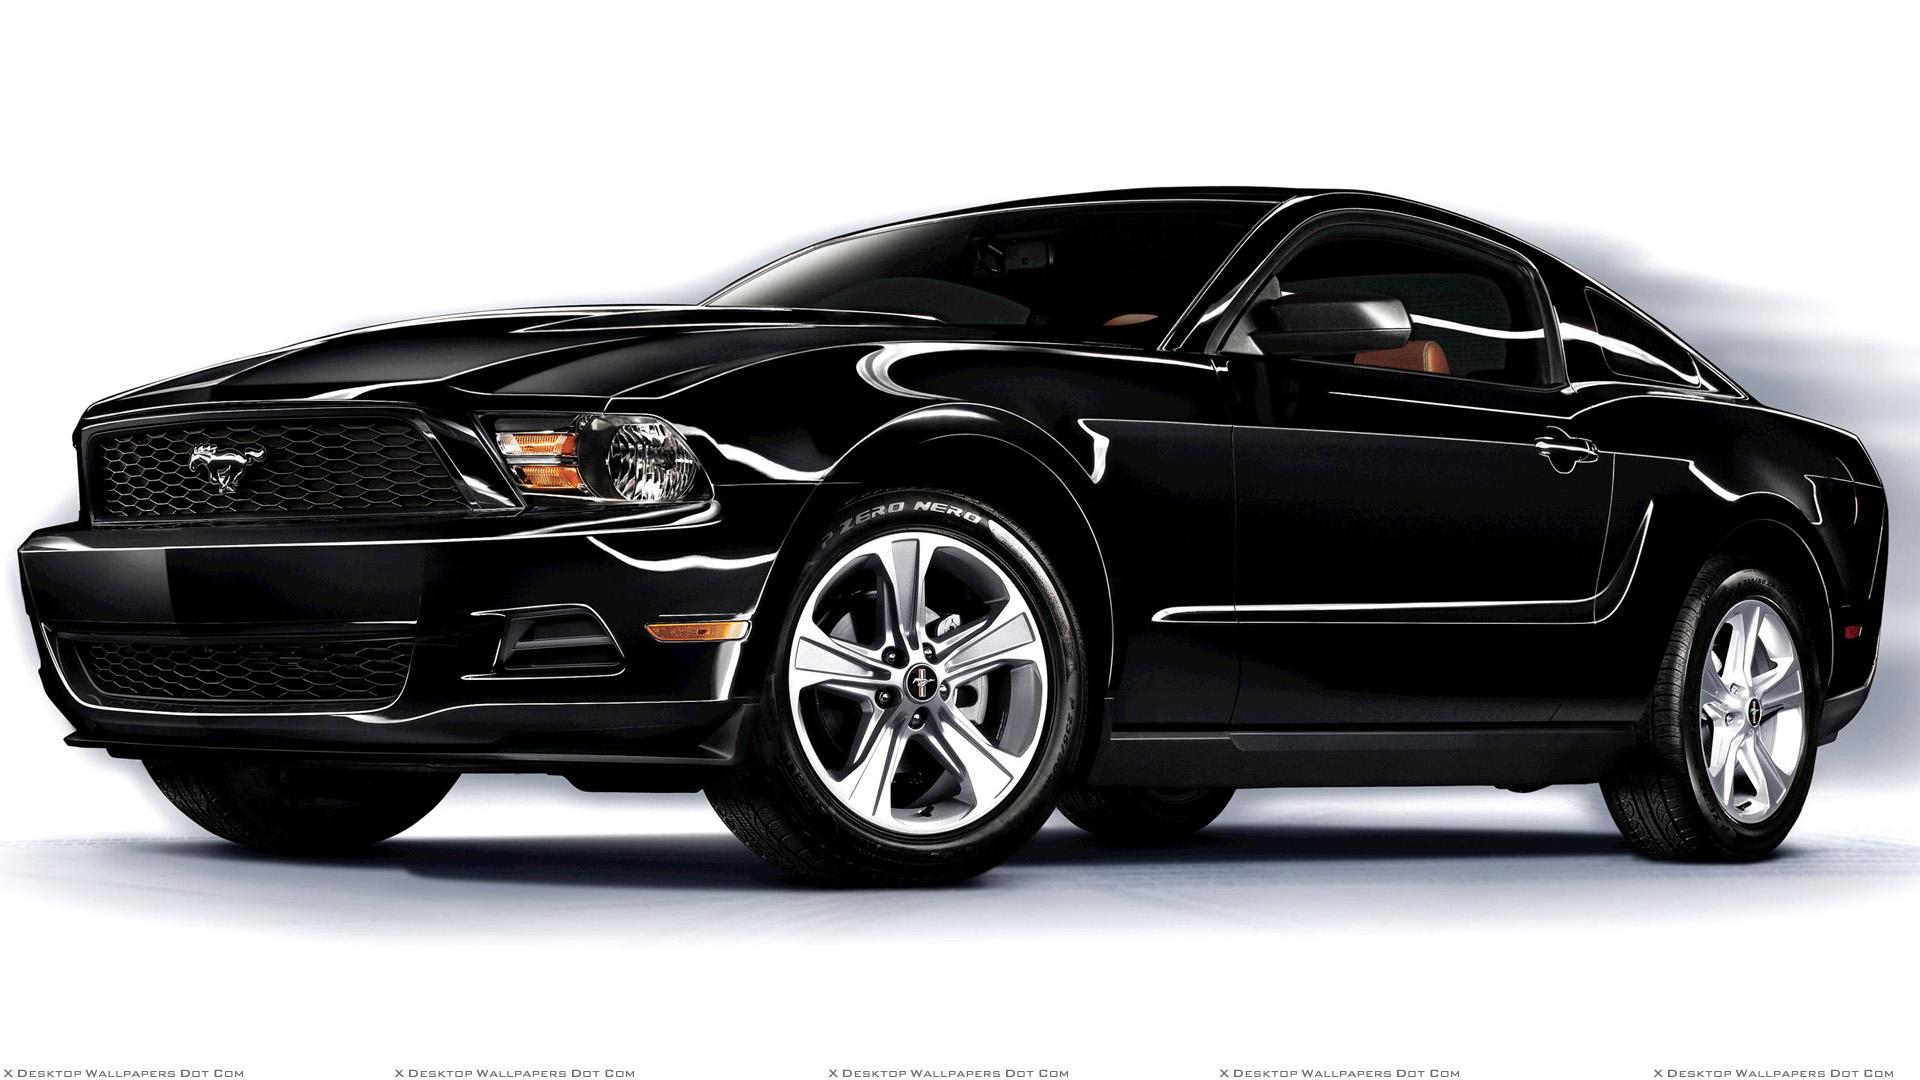 Ford Mustang Wallpaper, Photo & Image in HD